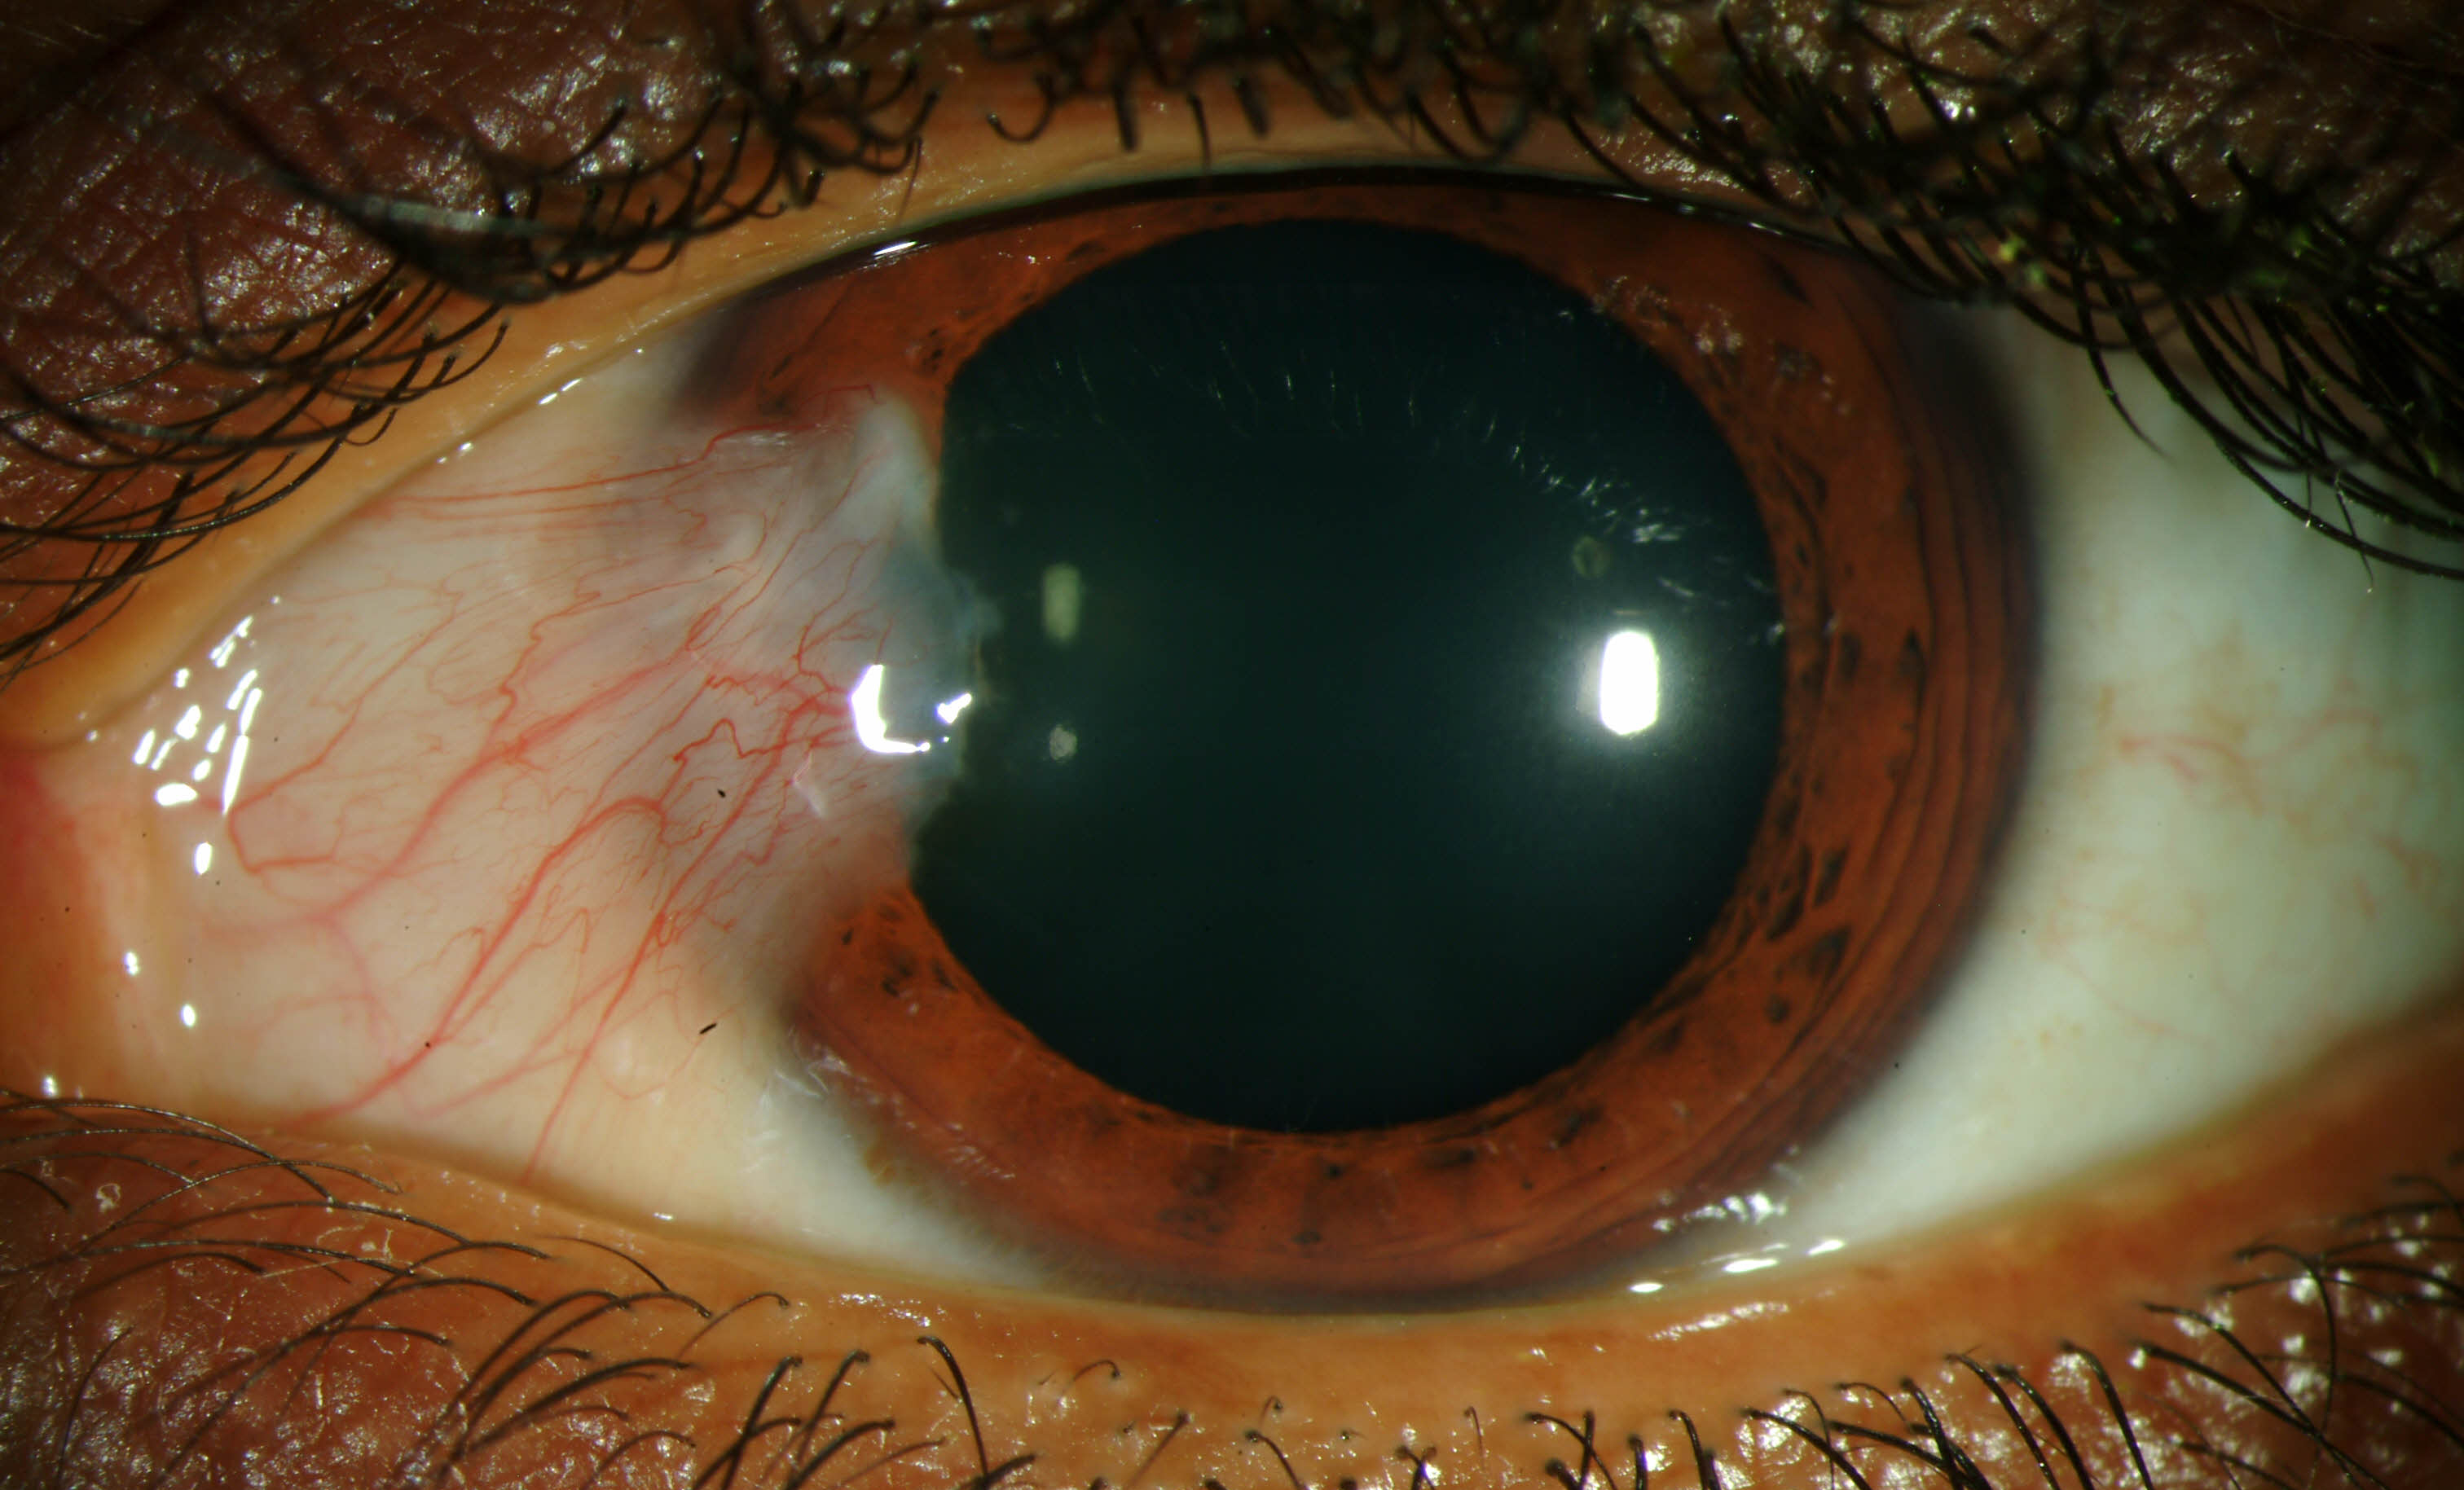 Pterygium and neoplastic disease may not overlap as much as previously thought.